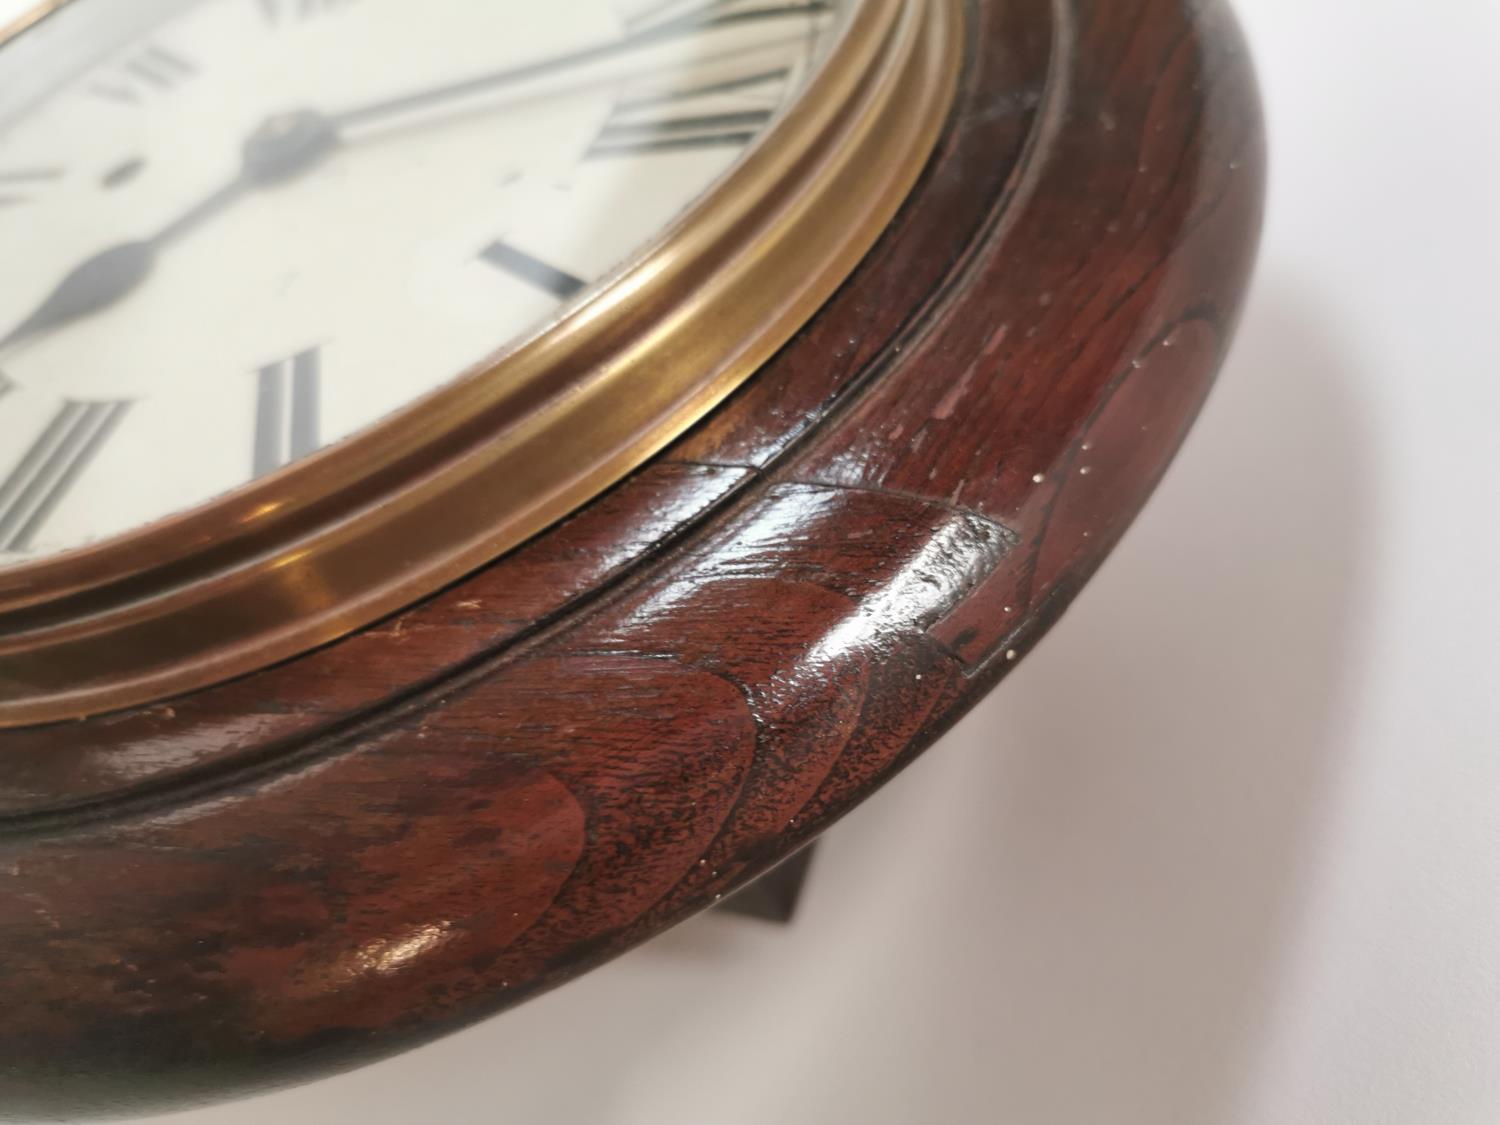 19th C. oak station clock with painted dial {29 cm Dia. x 14 cm D}. - Image 2 of 4